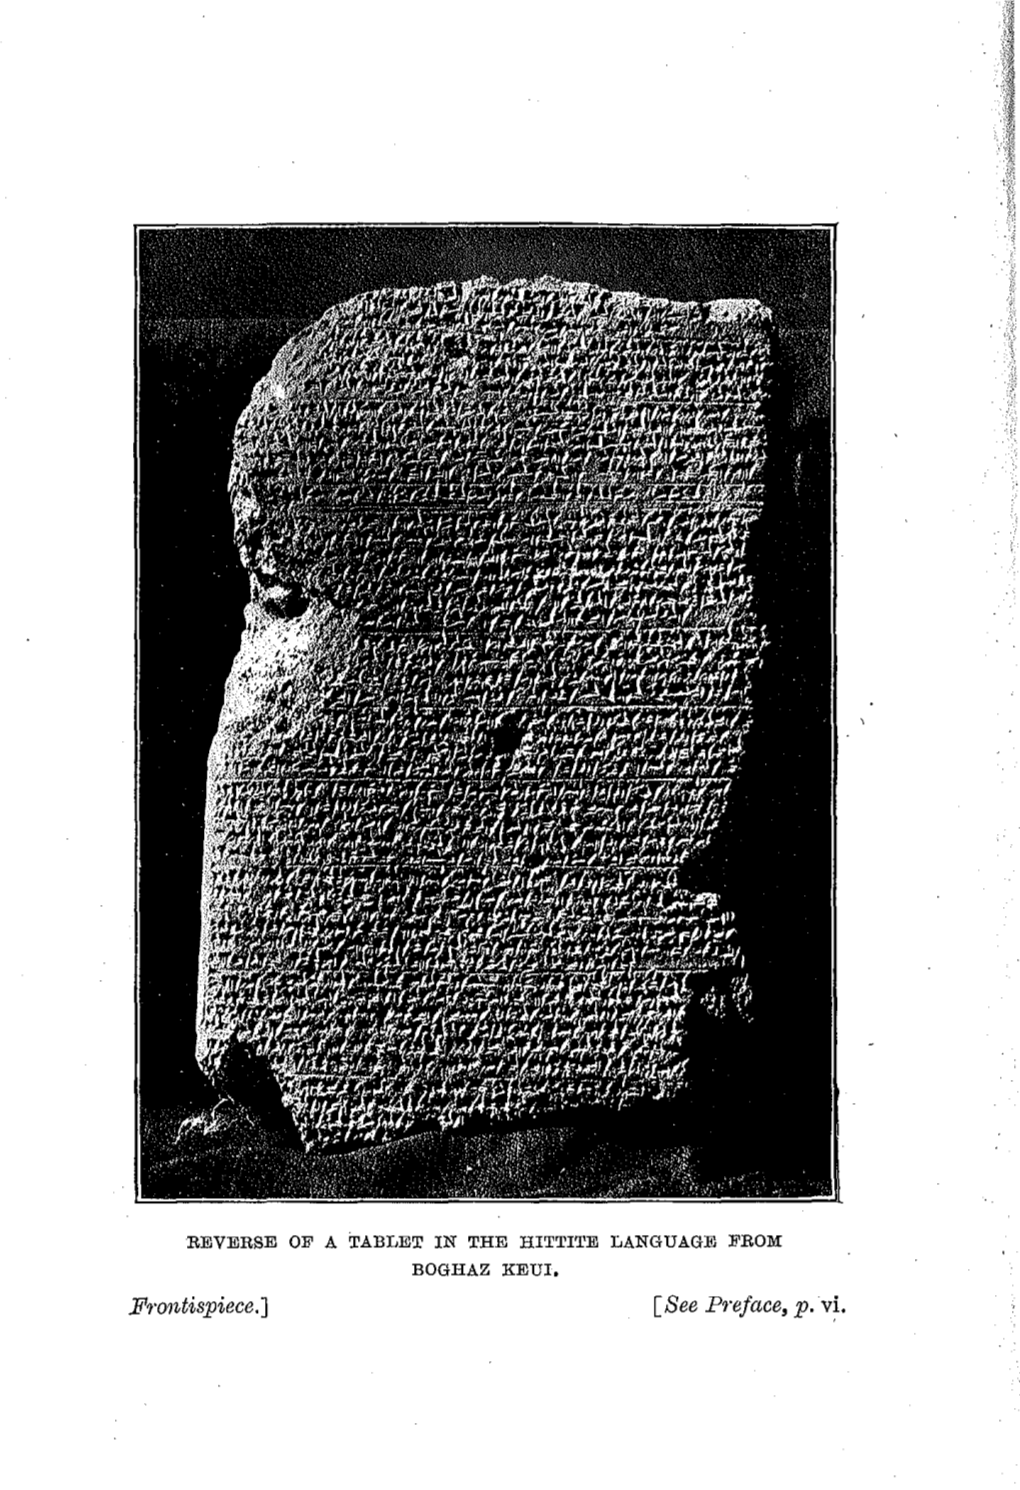 The Archreology of the Cuneiform Inscriptions